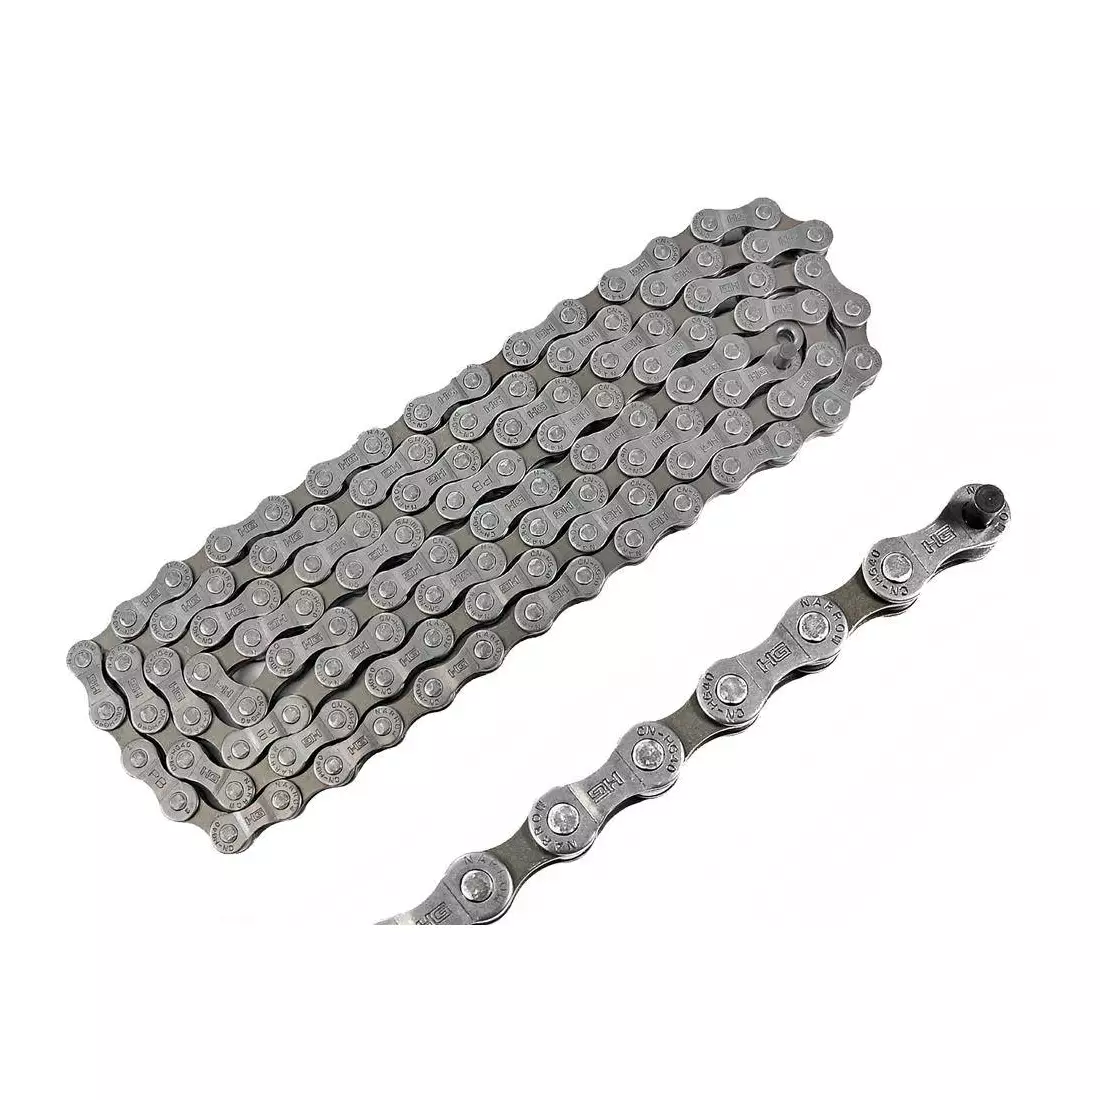 SHIMANO CN-HG40 bicycle chain 6/7/8 speed, 114 links, gray